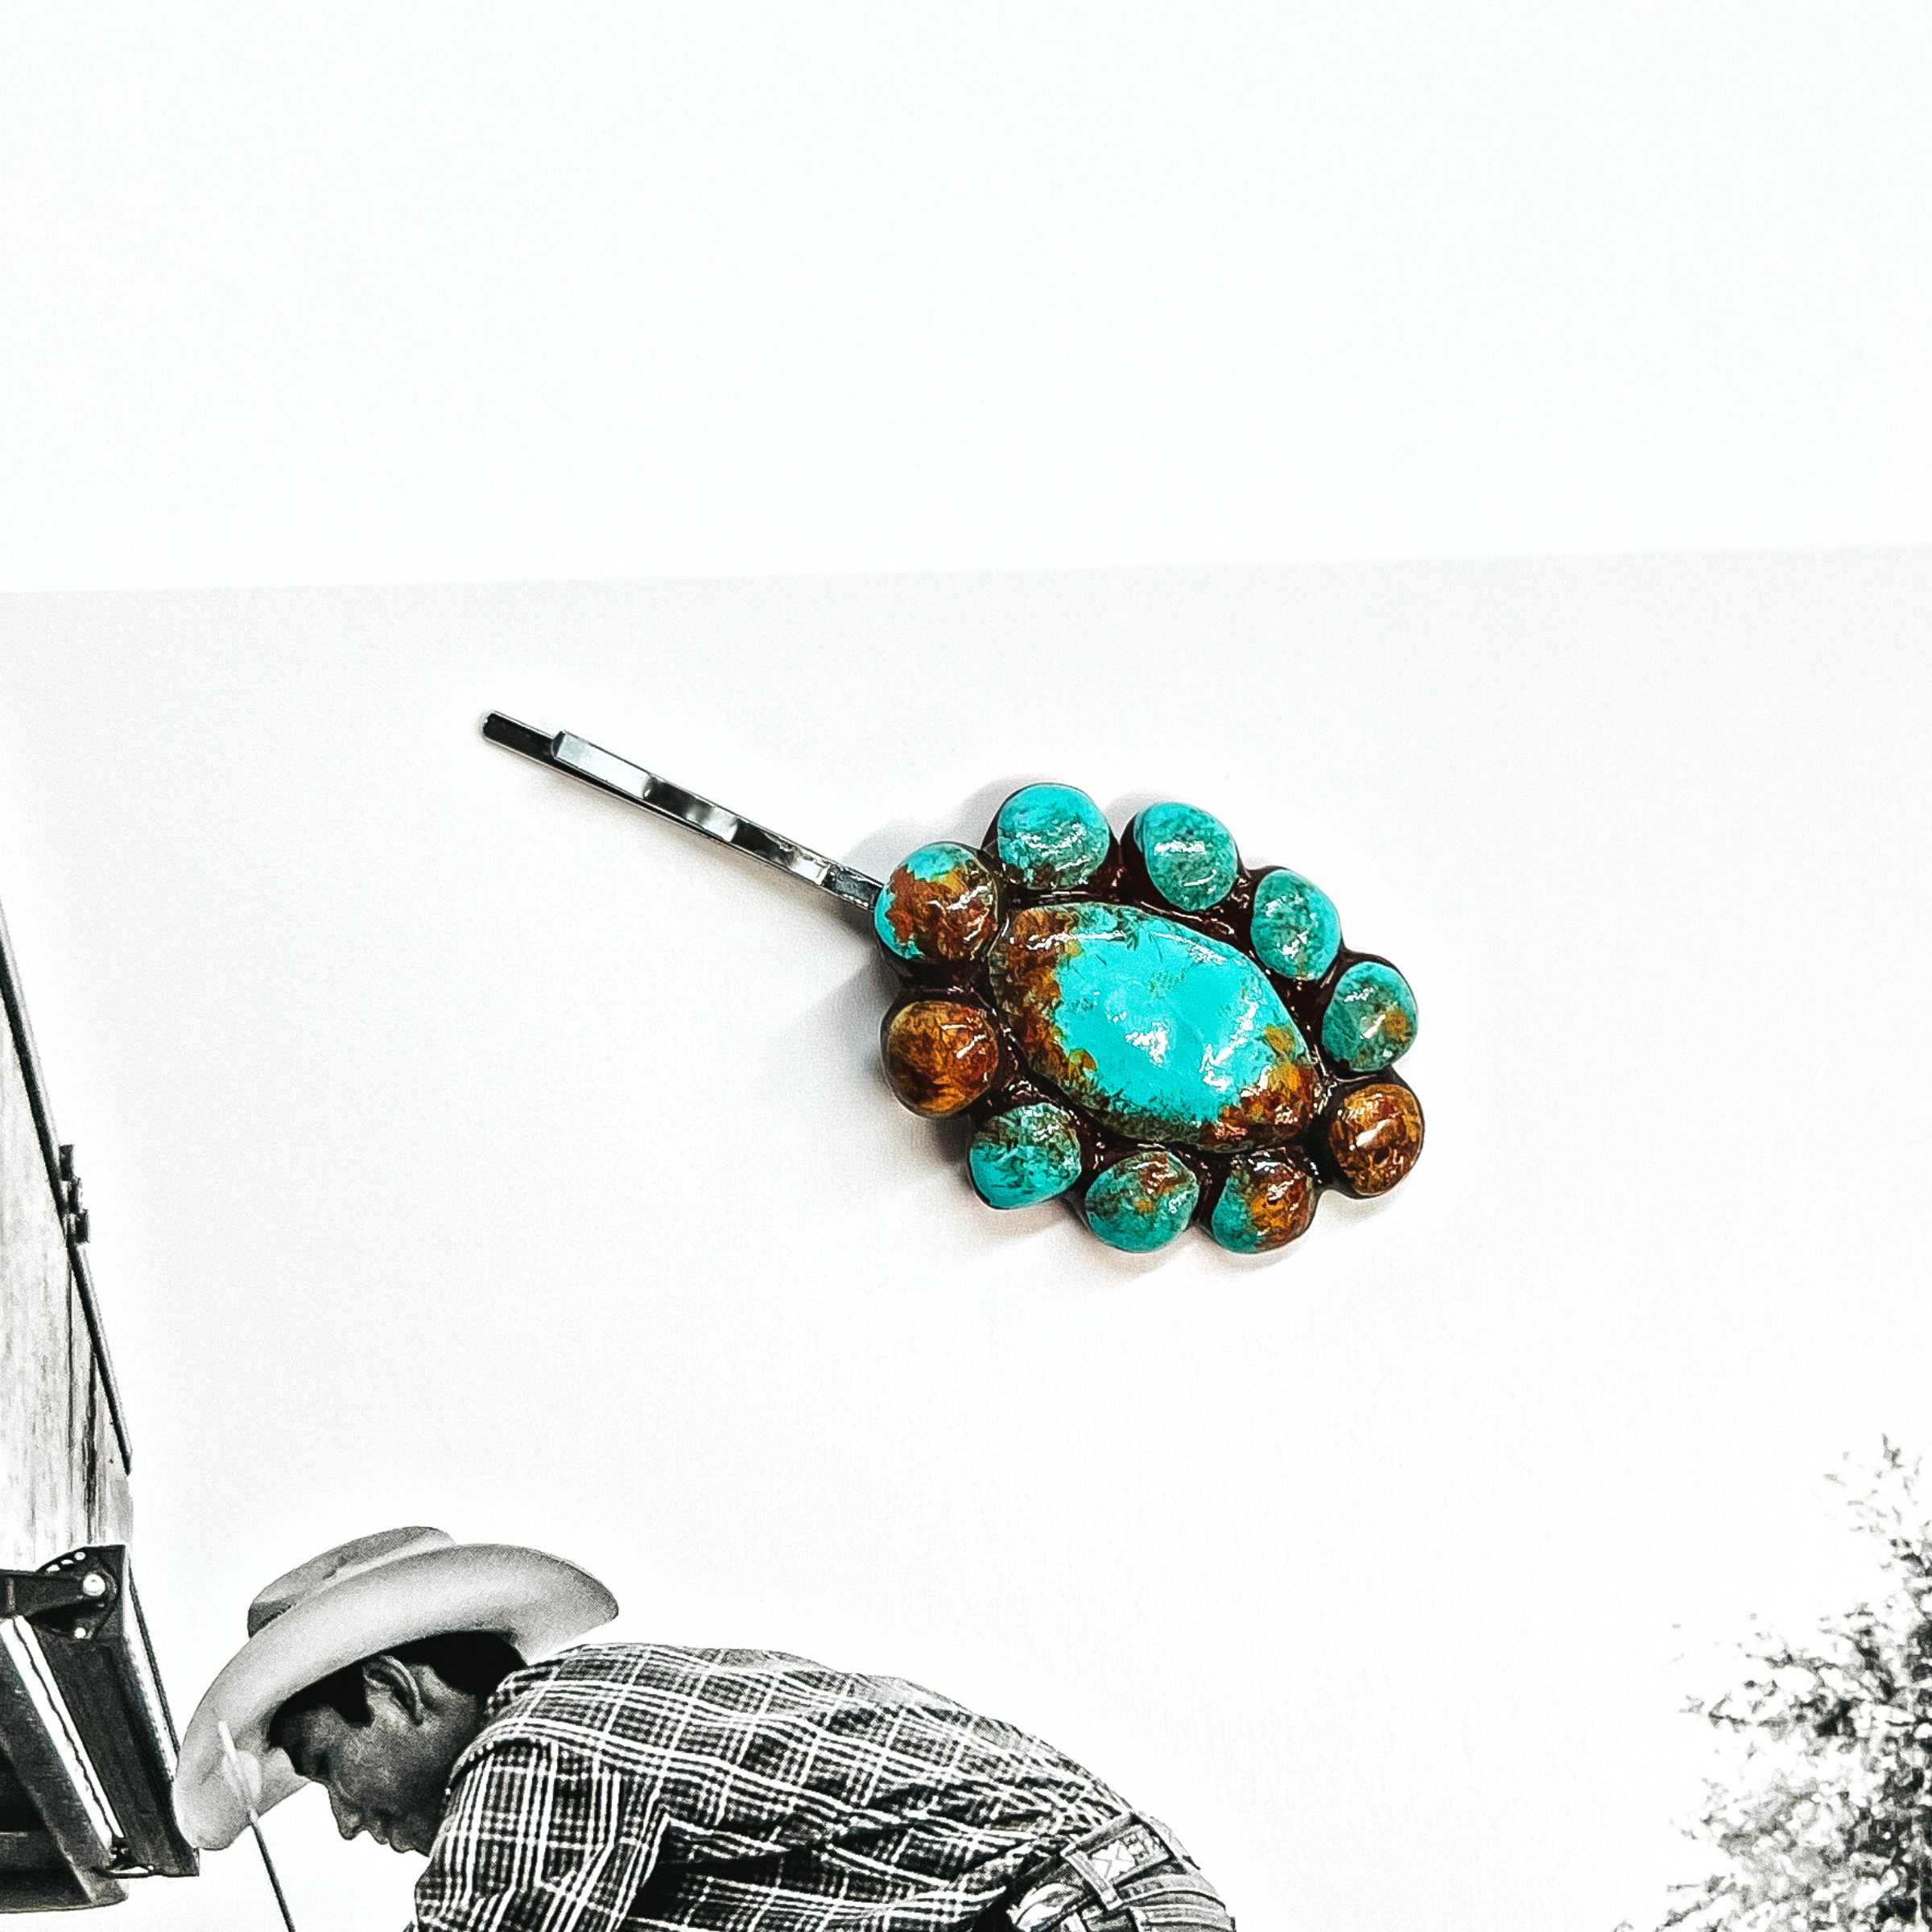 Waxahachie Clay Hair Pin in Turquoise - Giddy Up Glamour Boutique